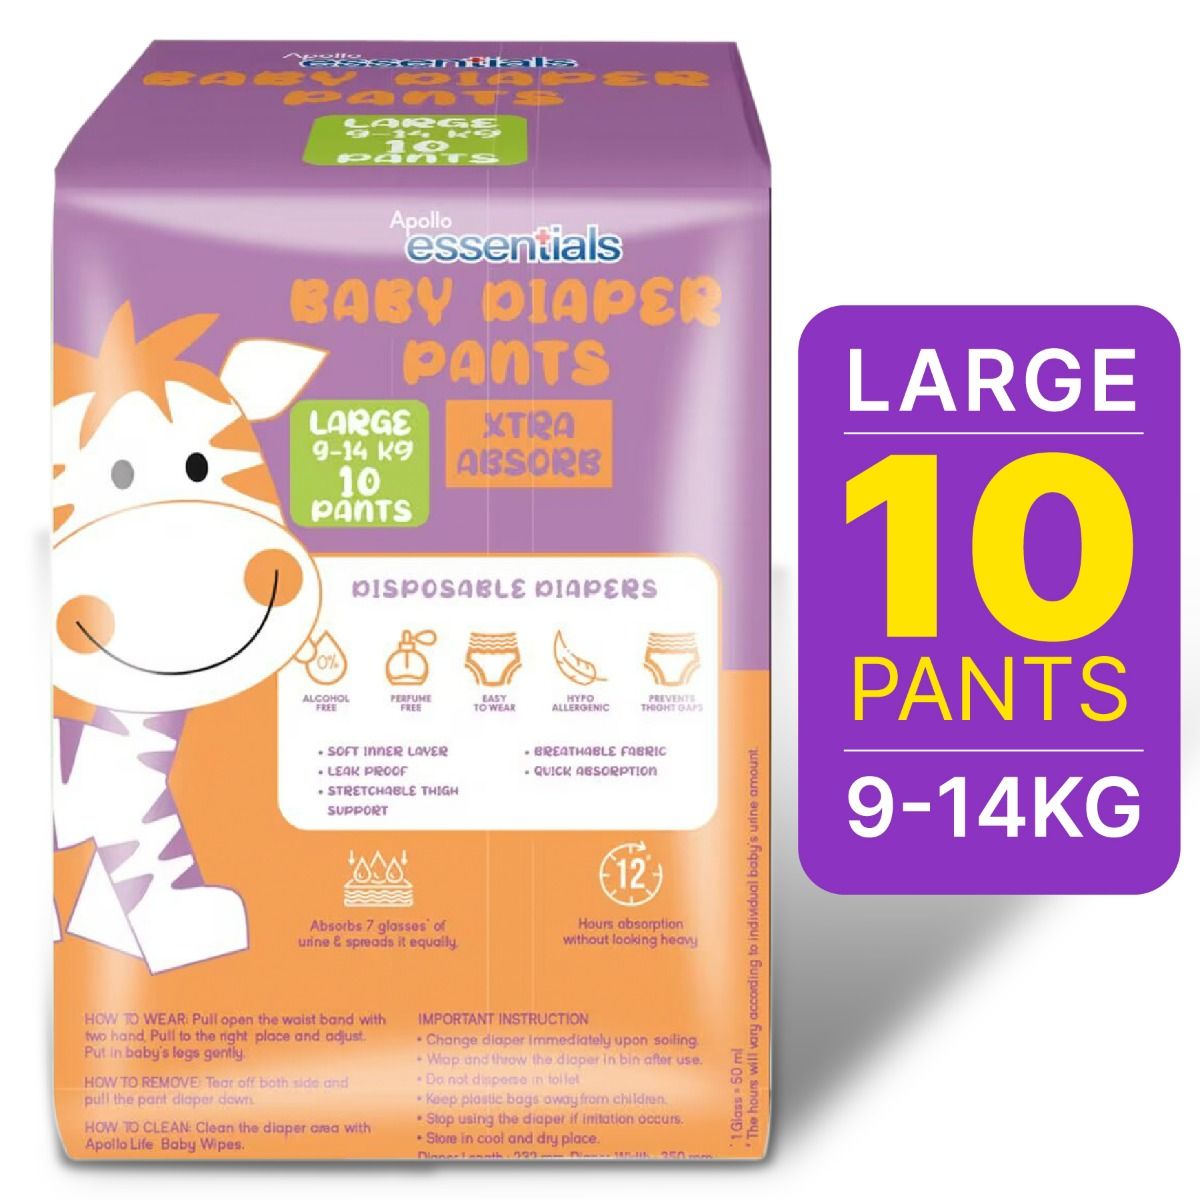 https://amzn.to/31ZvhIdHuggies Wonder Pants Diapers Monthly Pack, Large  (128 Cou...  https://www.amazon.in/dp/B075GHP2LX/ref=cm_sw_r_pi_dp_U_x_VF0NDb7HQ8Q4W